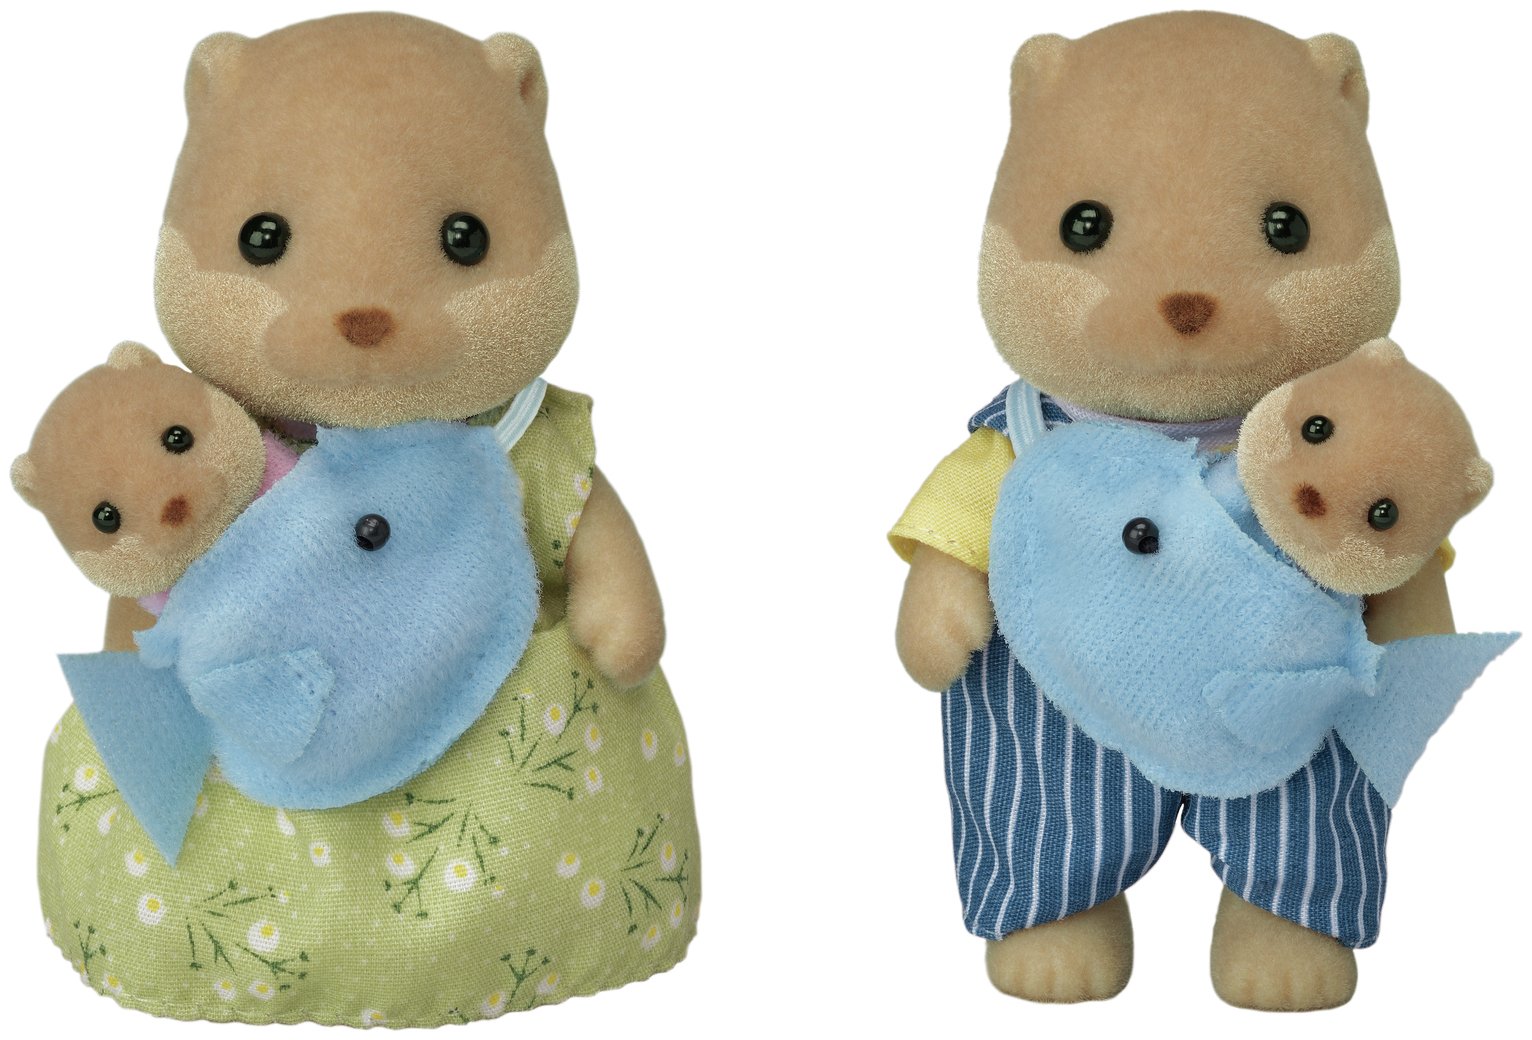 cheapest place to buy sylvanian families